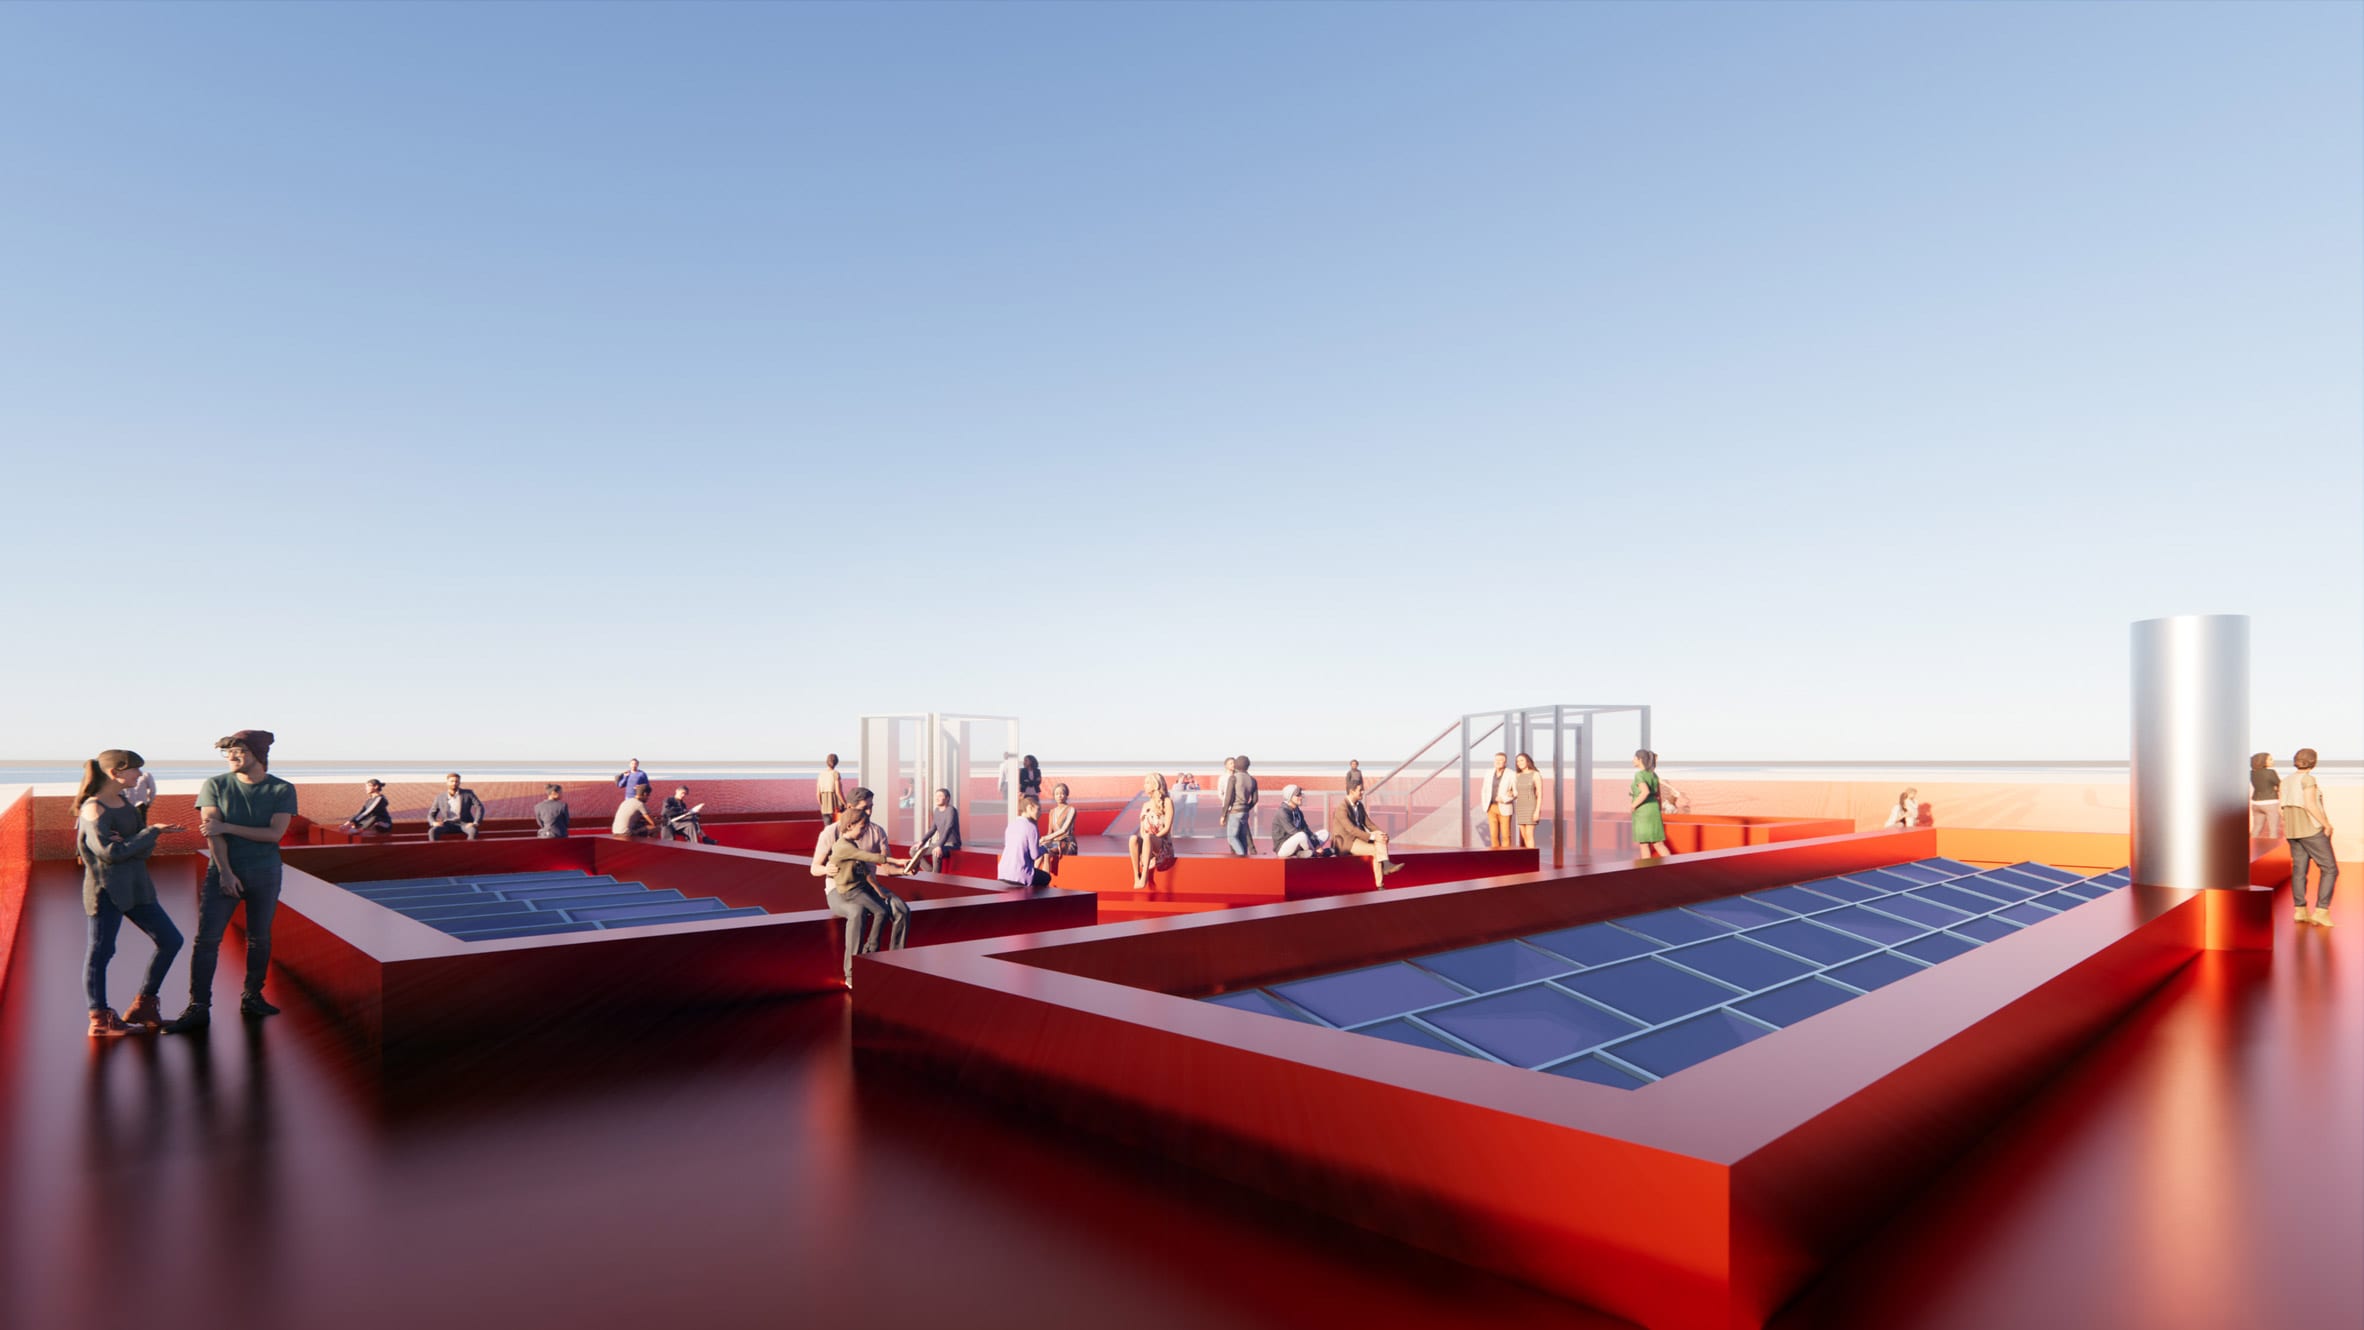 A visual of a red rooftop terrace